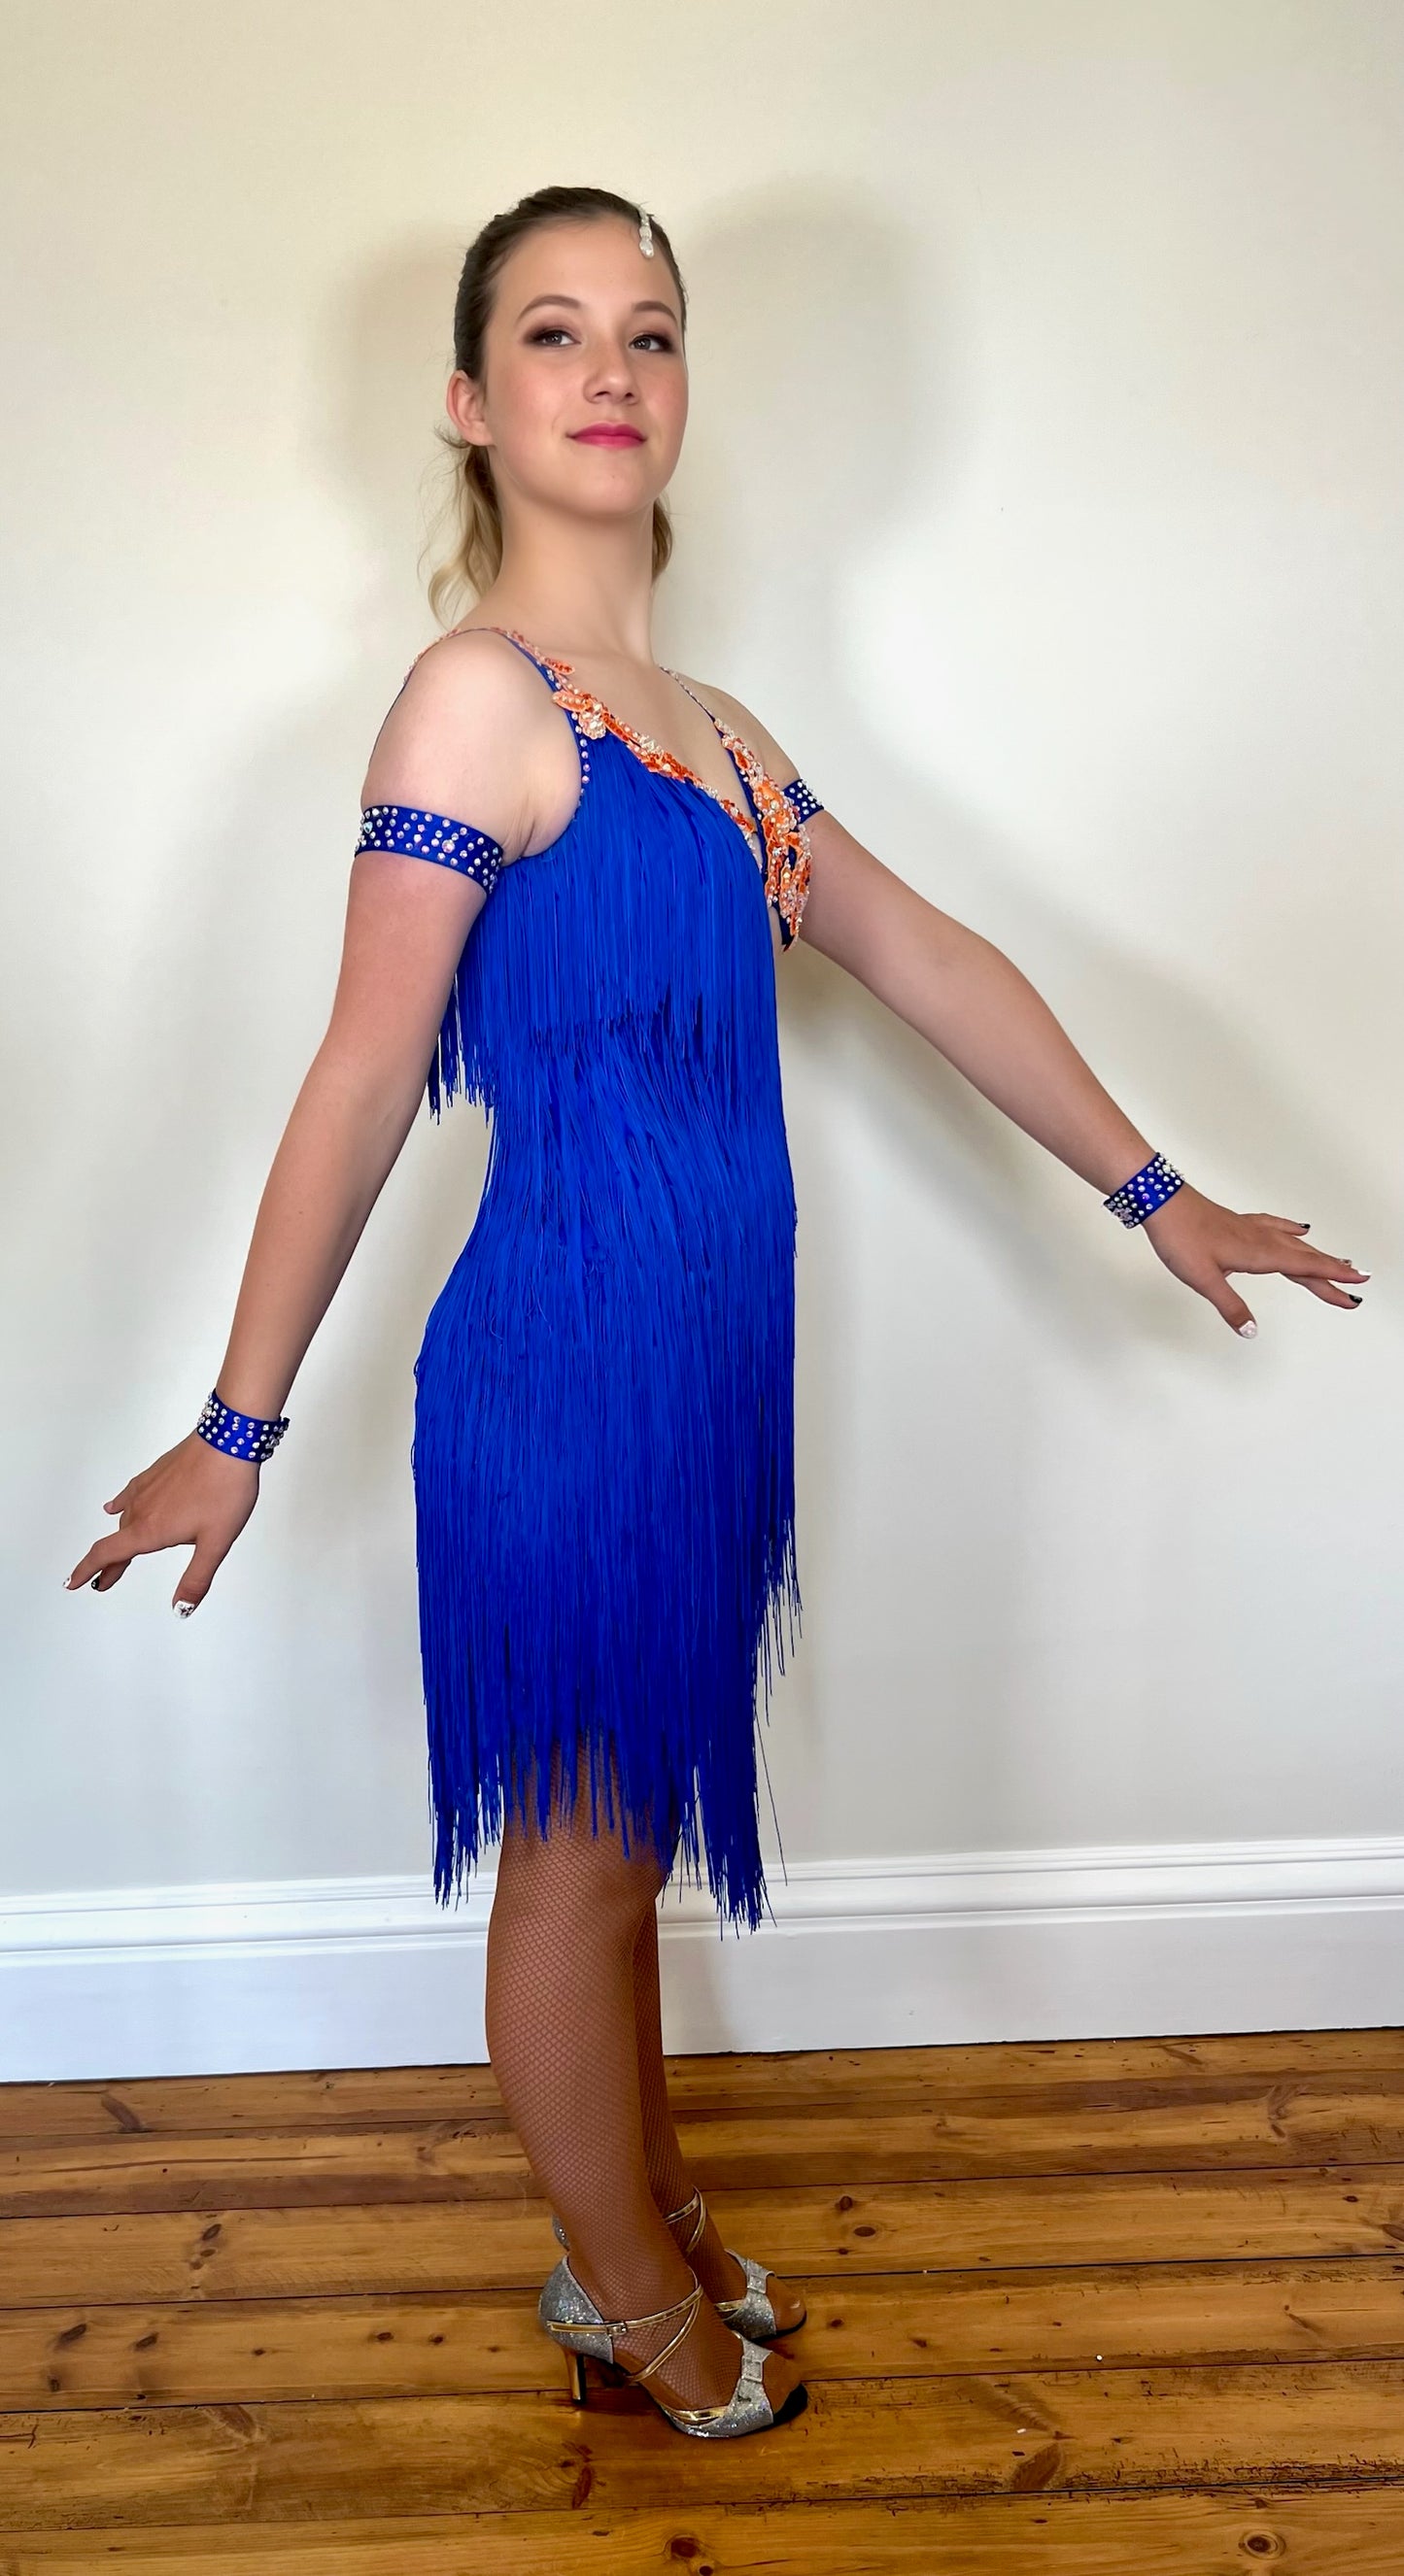 108 Bright Royal Blue & Orange strap Detail Latin Dress decorated with orange appliqué AB & sapphire stones. Fringing to the right side and skirt.